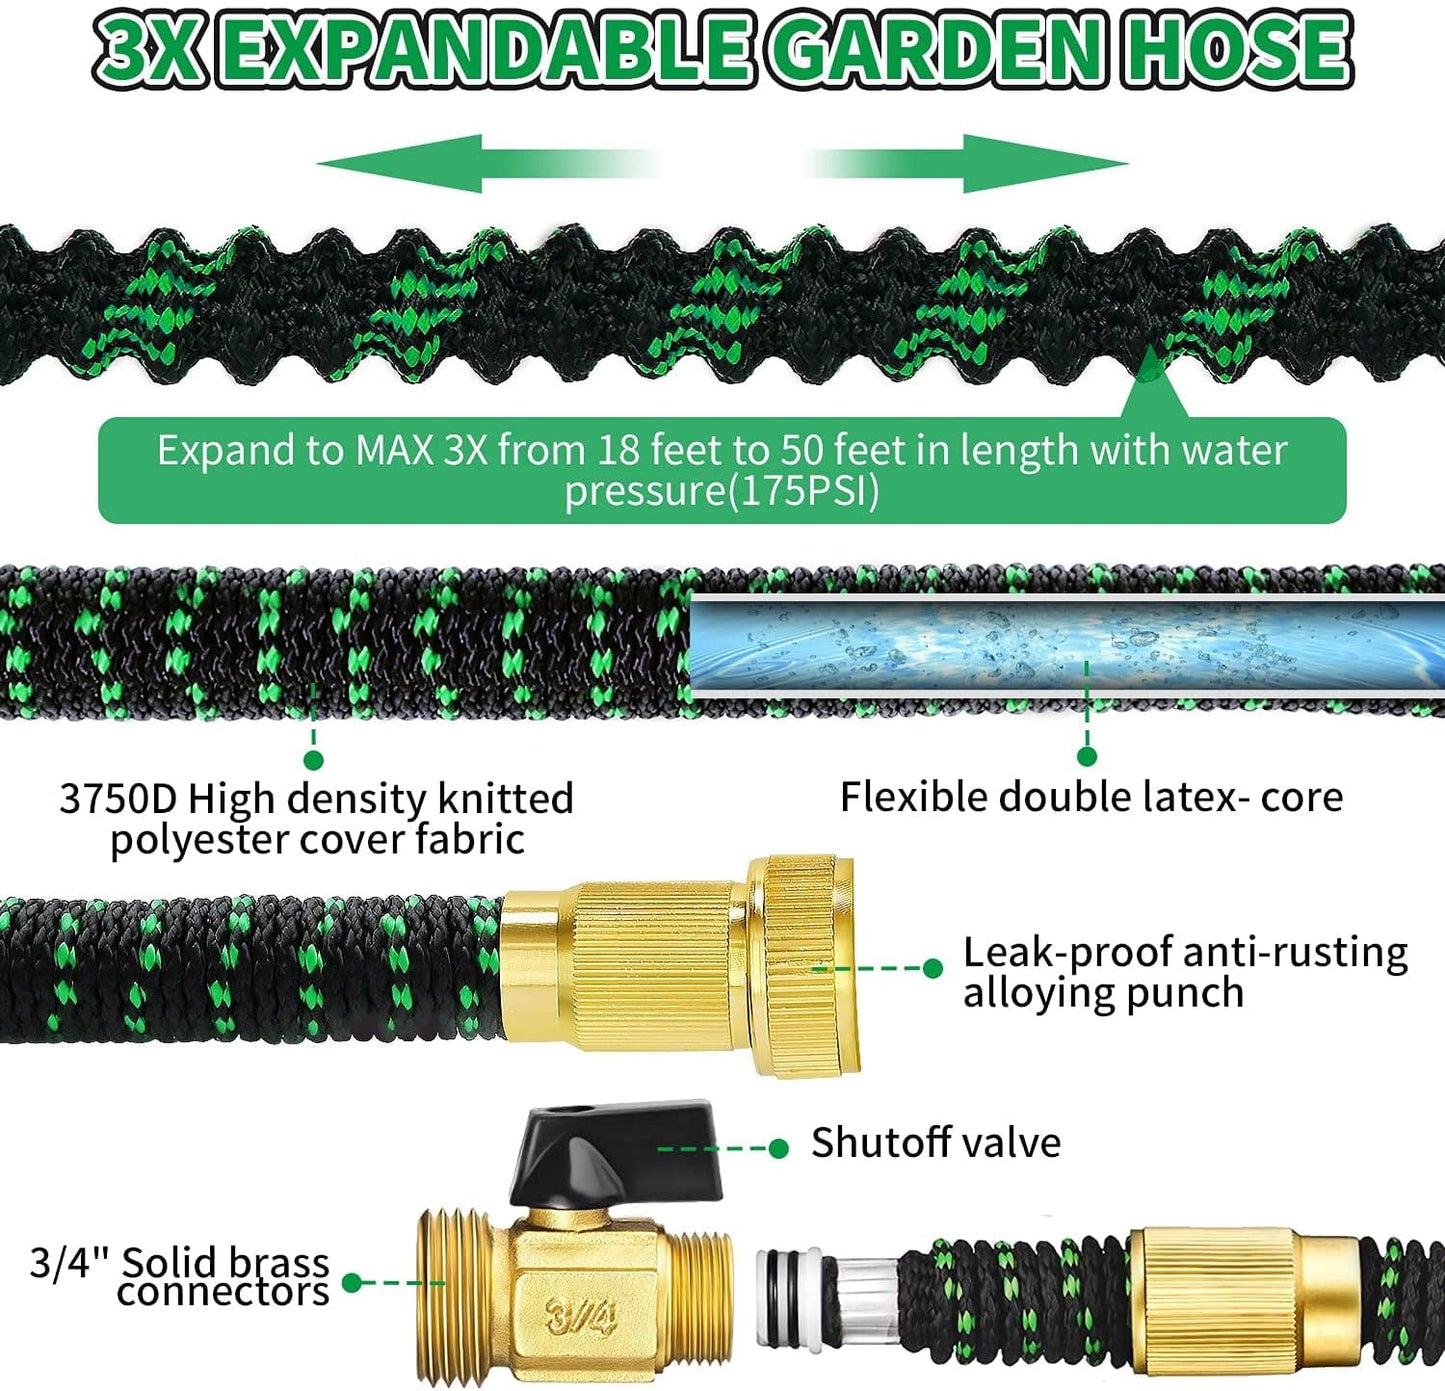 50 FT Flexible and Expandable Garden Hose   Strongest Triple Latex Core with 3/4  Solid Brass Fittings and 8 Function Spray Nozzle, Easy Storage Kink Free Water Hose